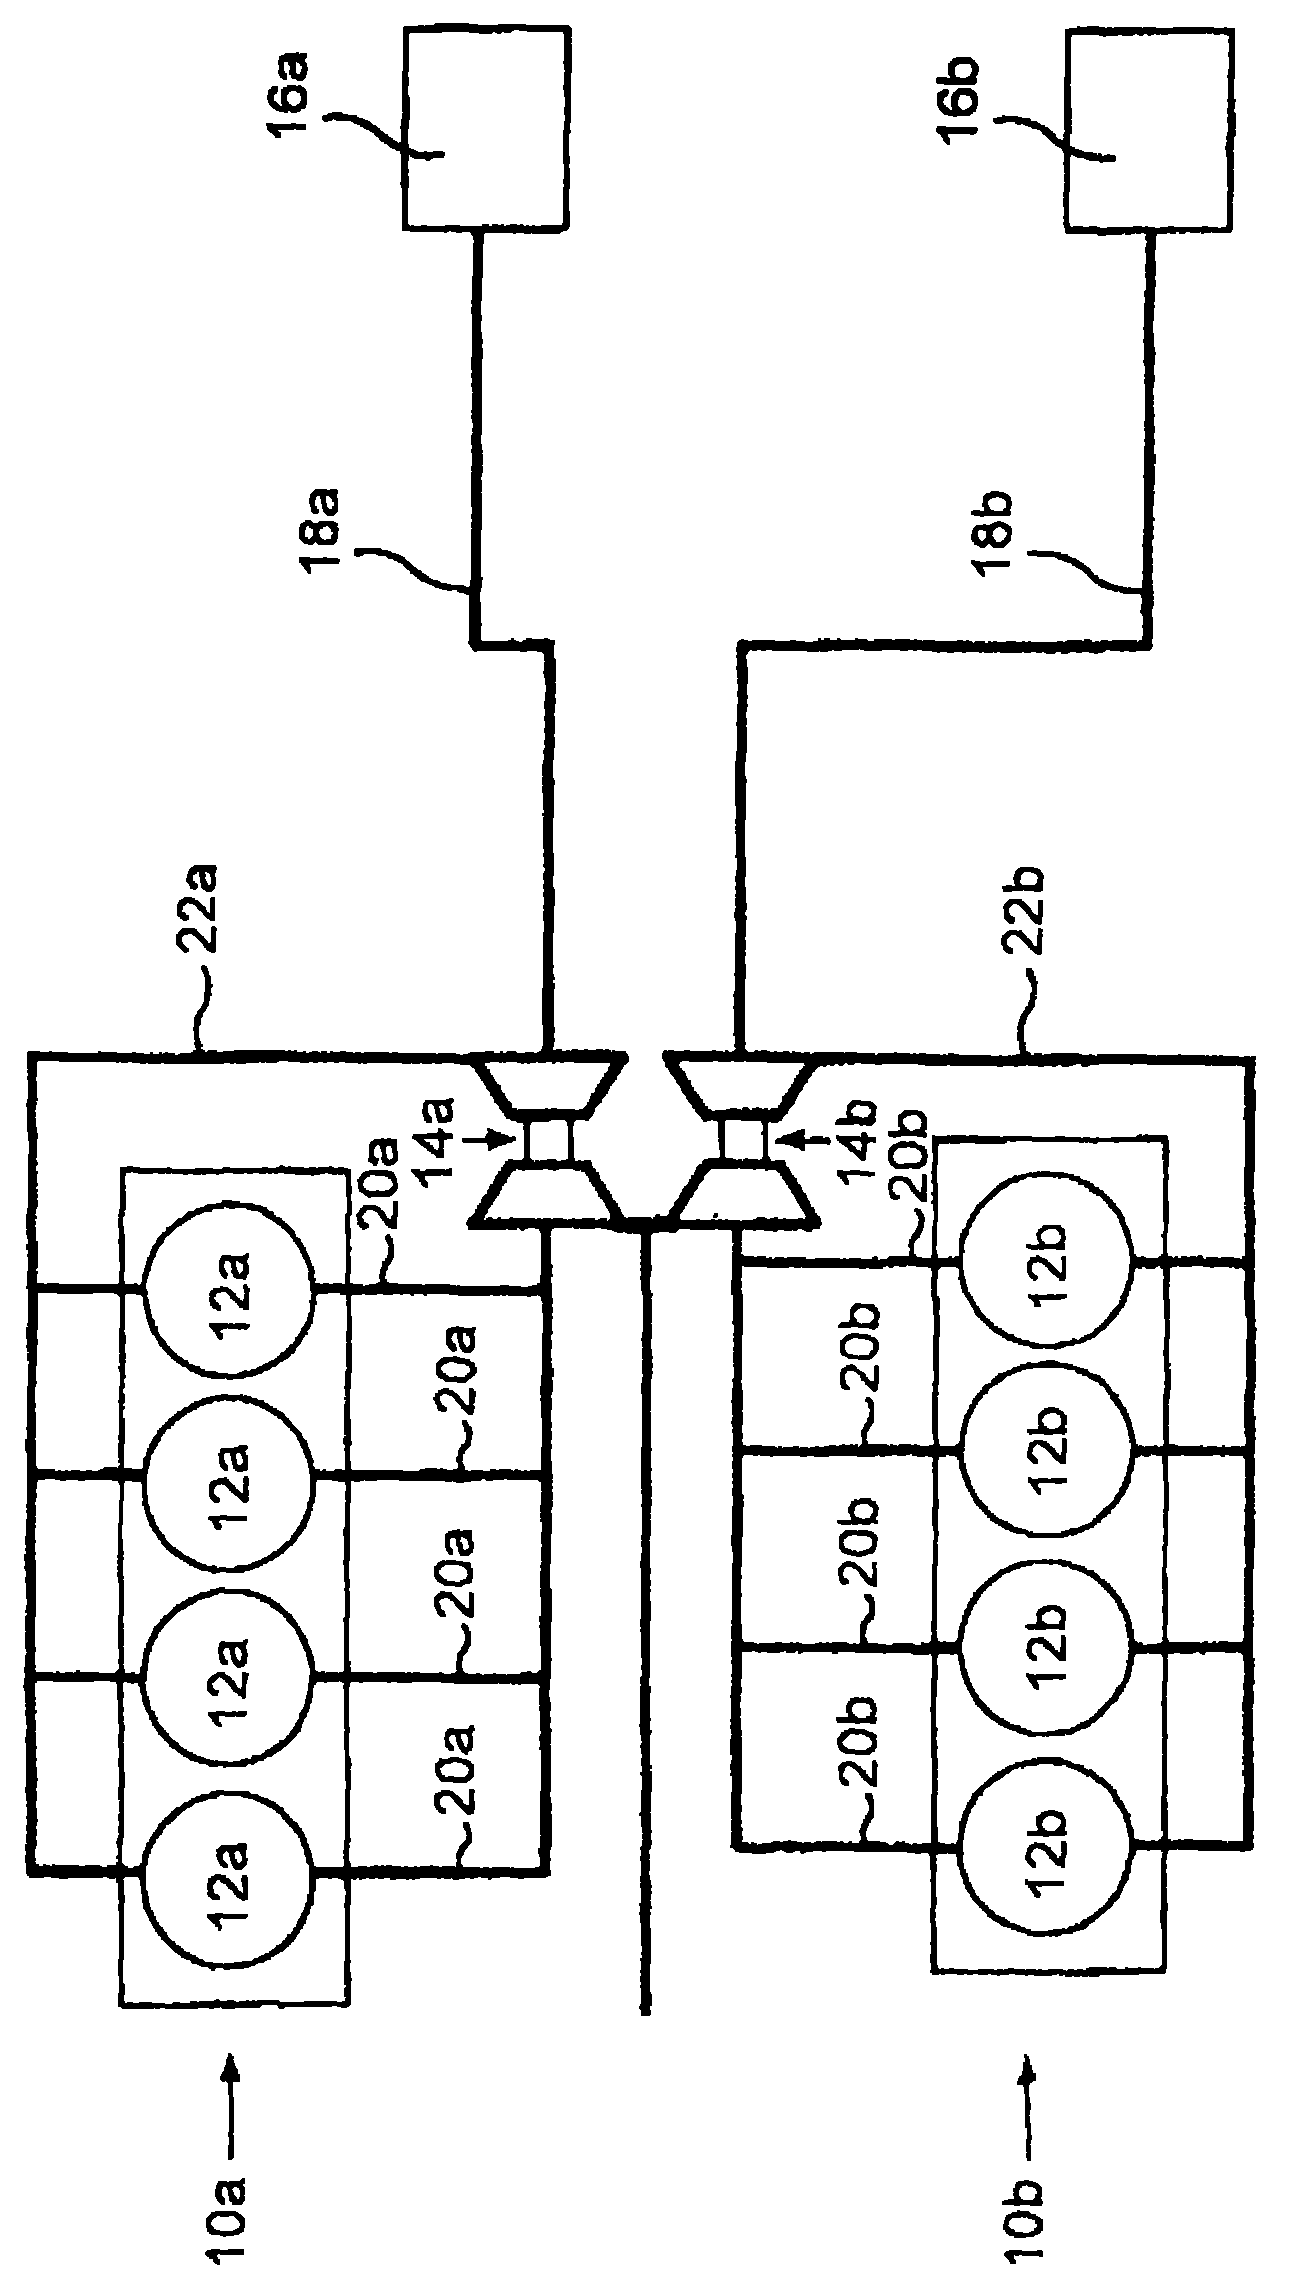 Structure having two independent turbochargers of combustion engines and operating method thereof